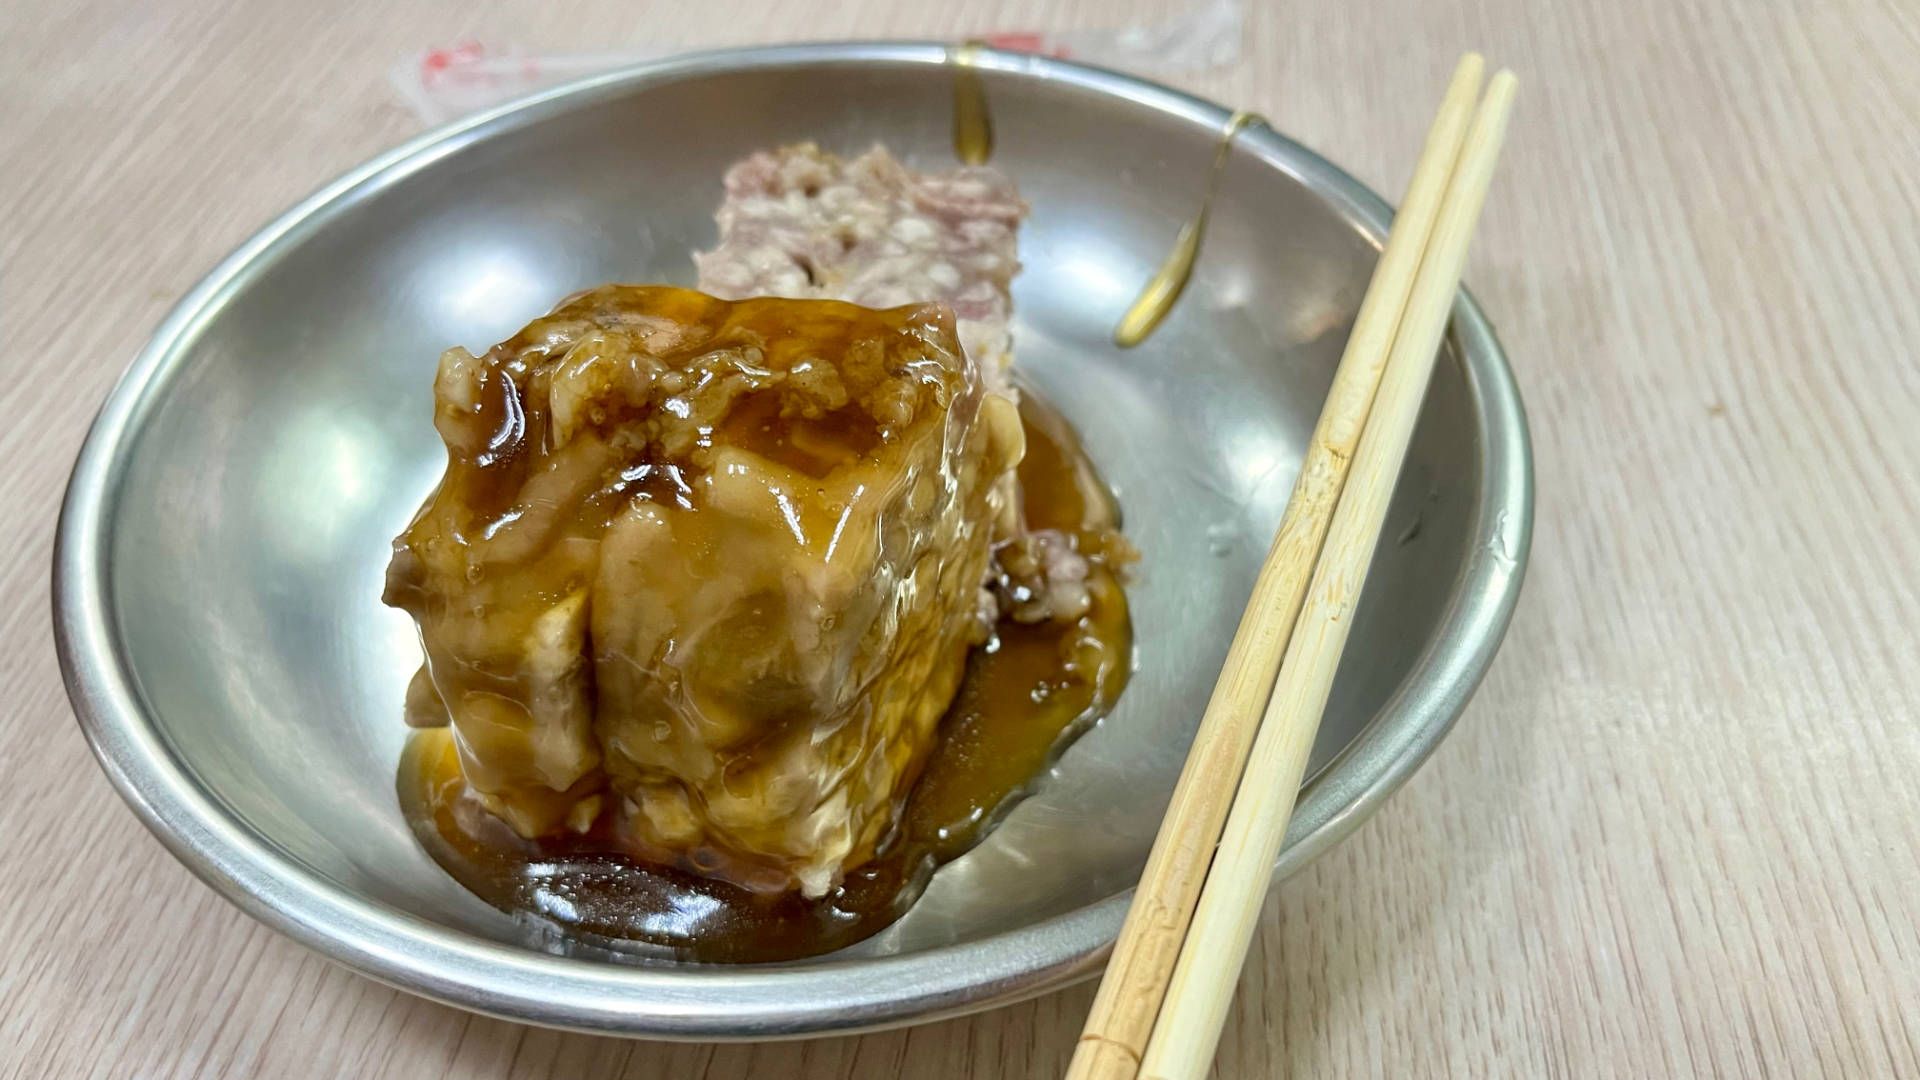 A steel bowl of taro glutinous rice smothered in a rich brown sauce, with wooden chopsticks resting on the bowl.